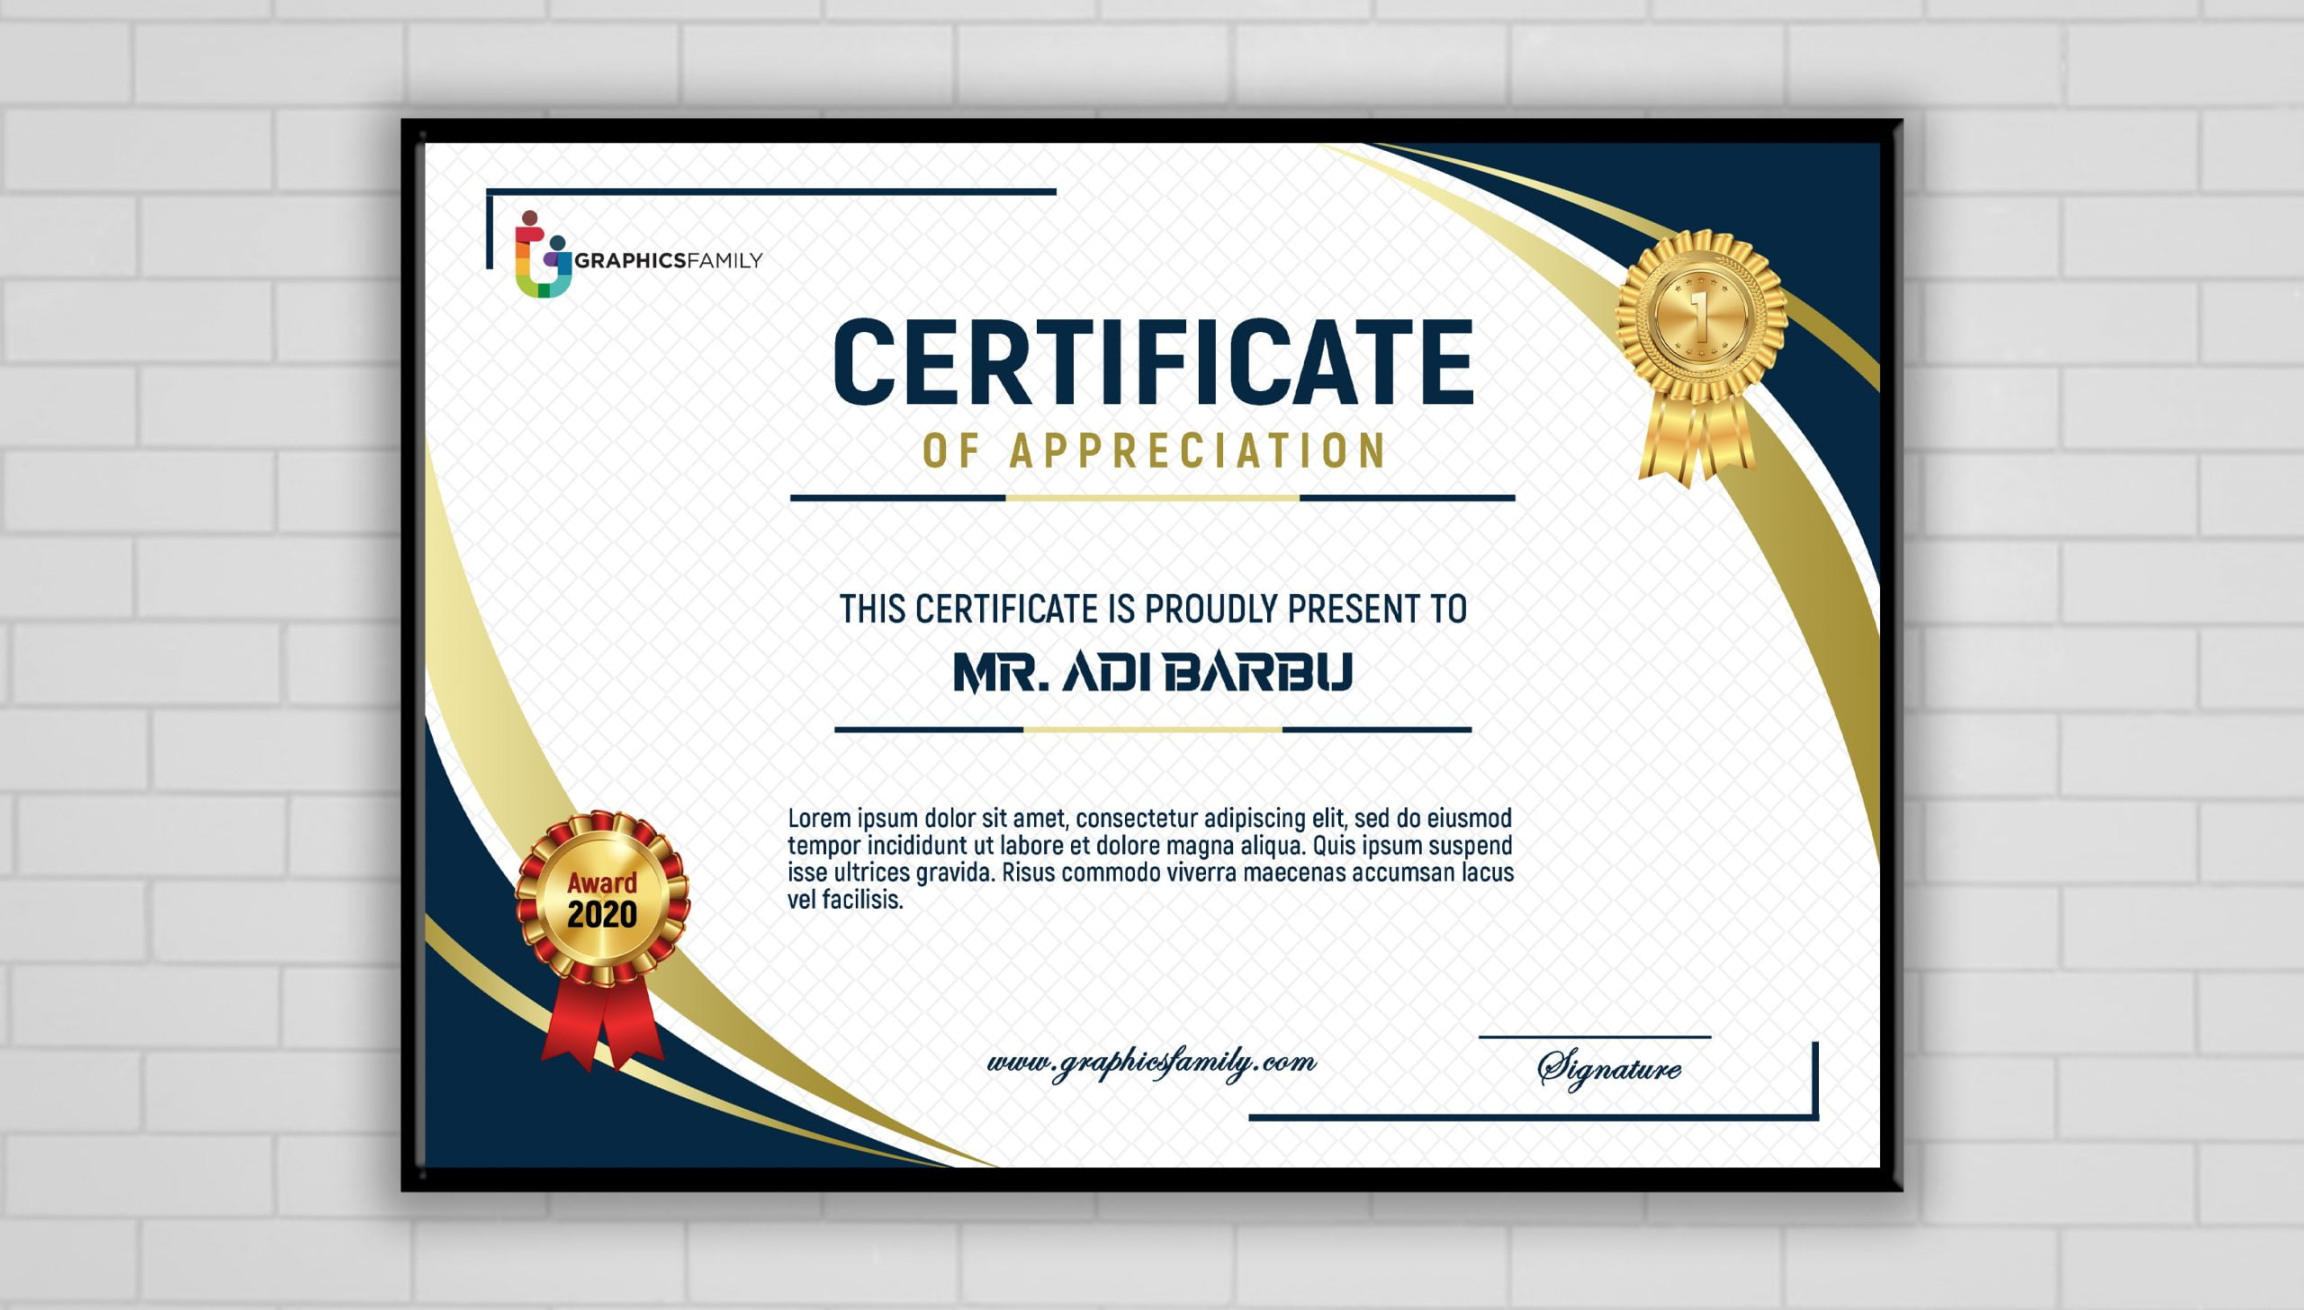 Modern Certificate Design Template Free psd – GraphicsFamily